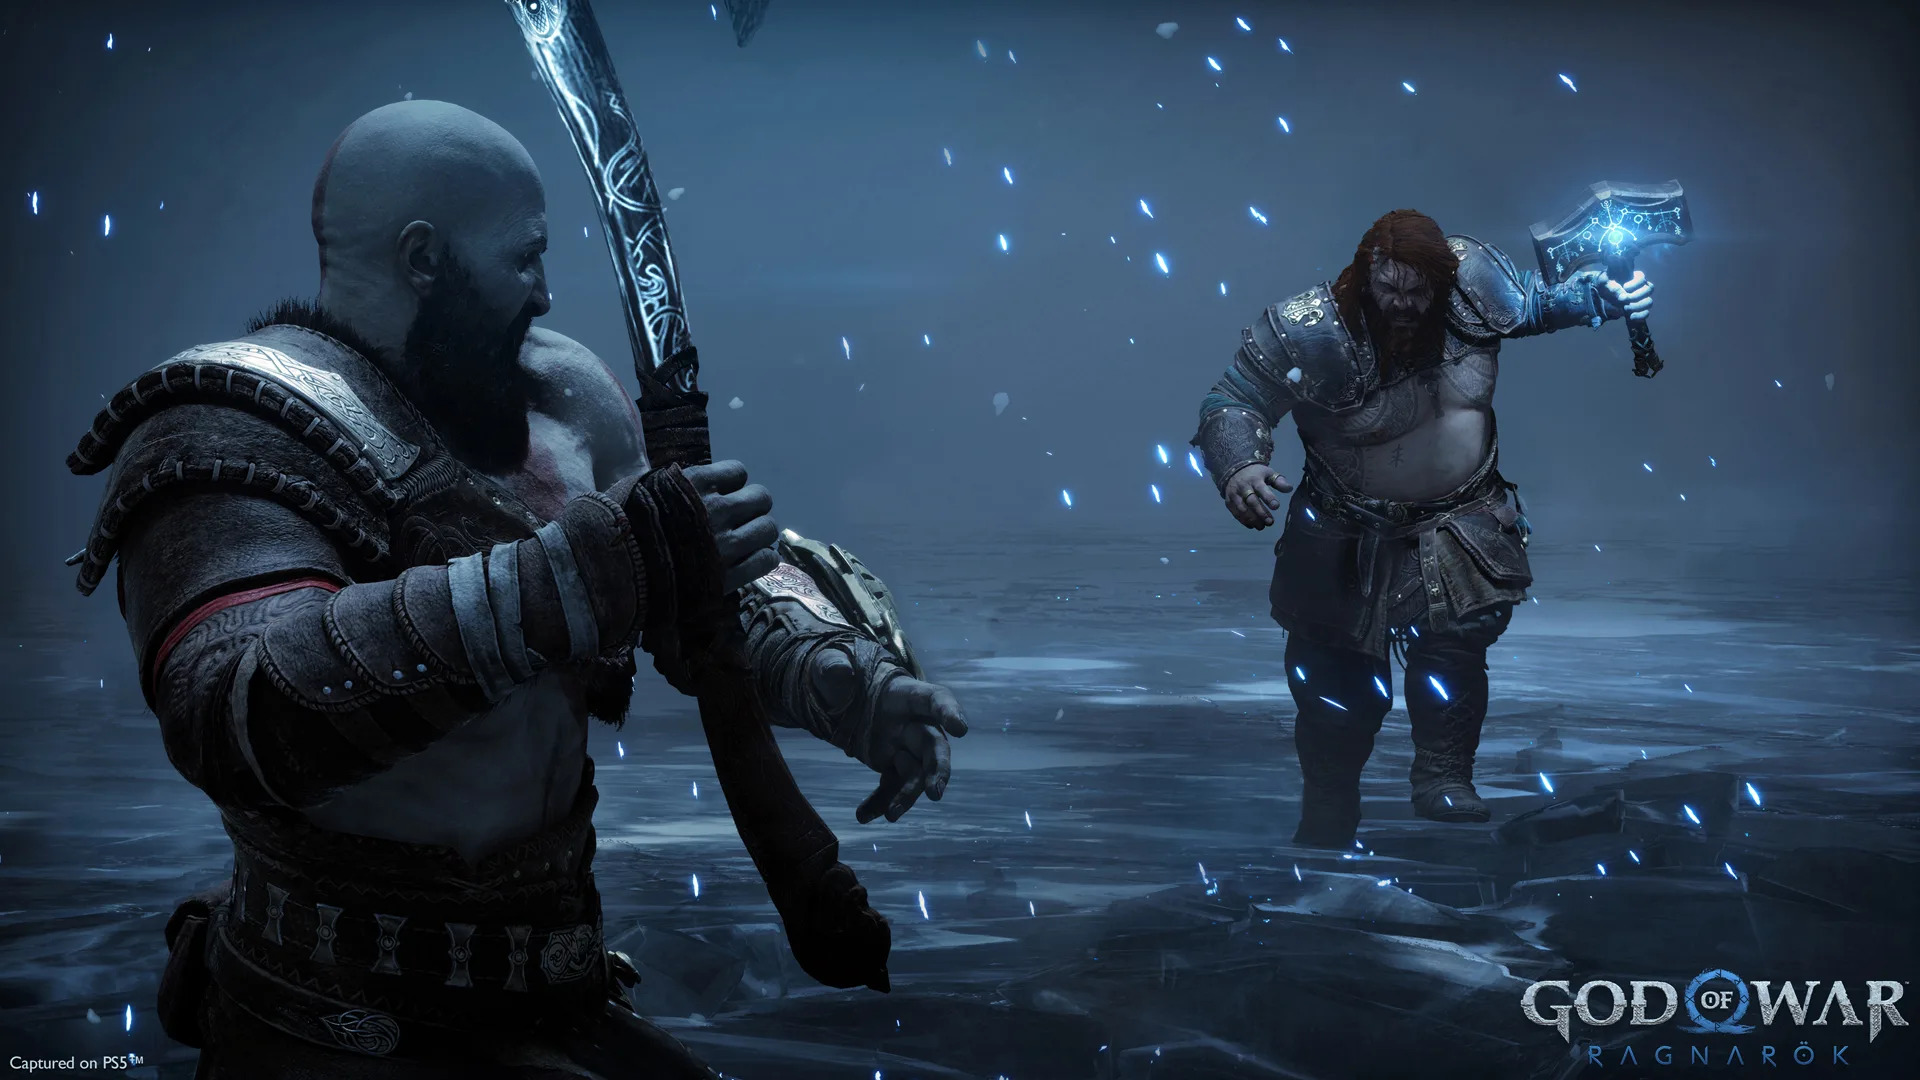 Small detail in Kratos' second interaction with Odin. : r/GodofWar